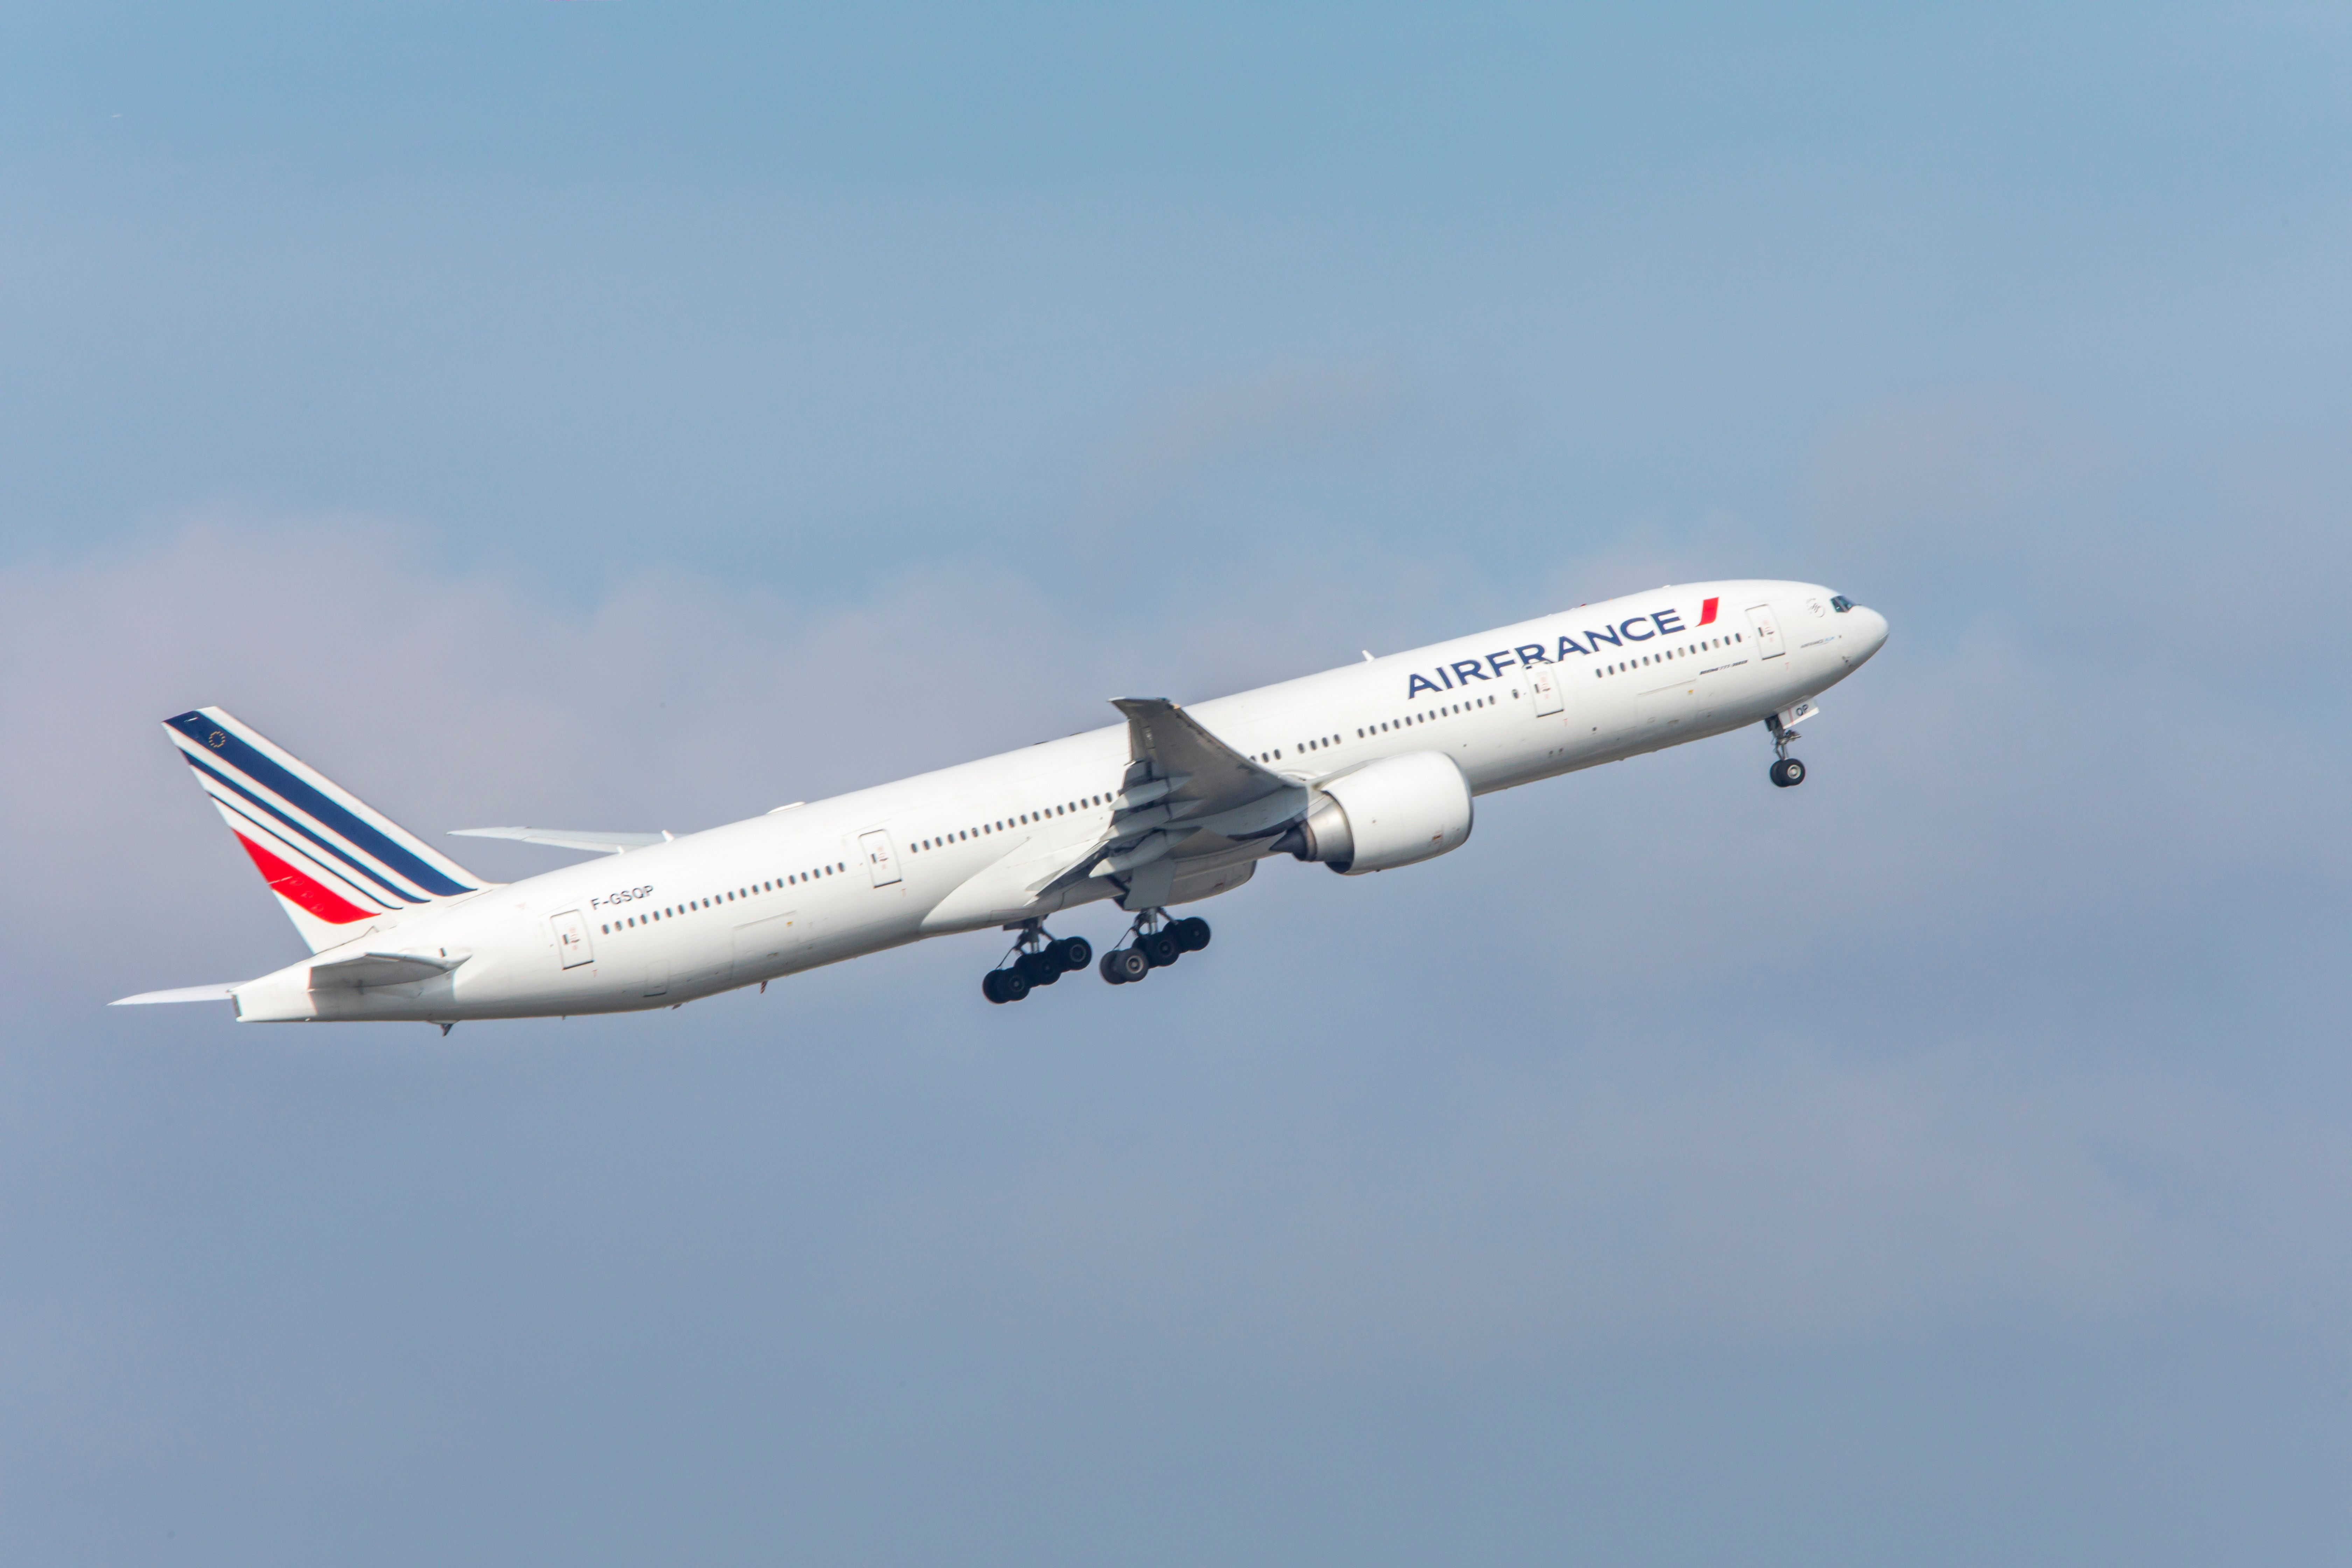 AirFrance Boeing 777-300